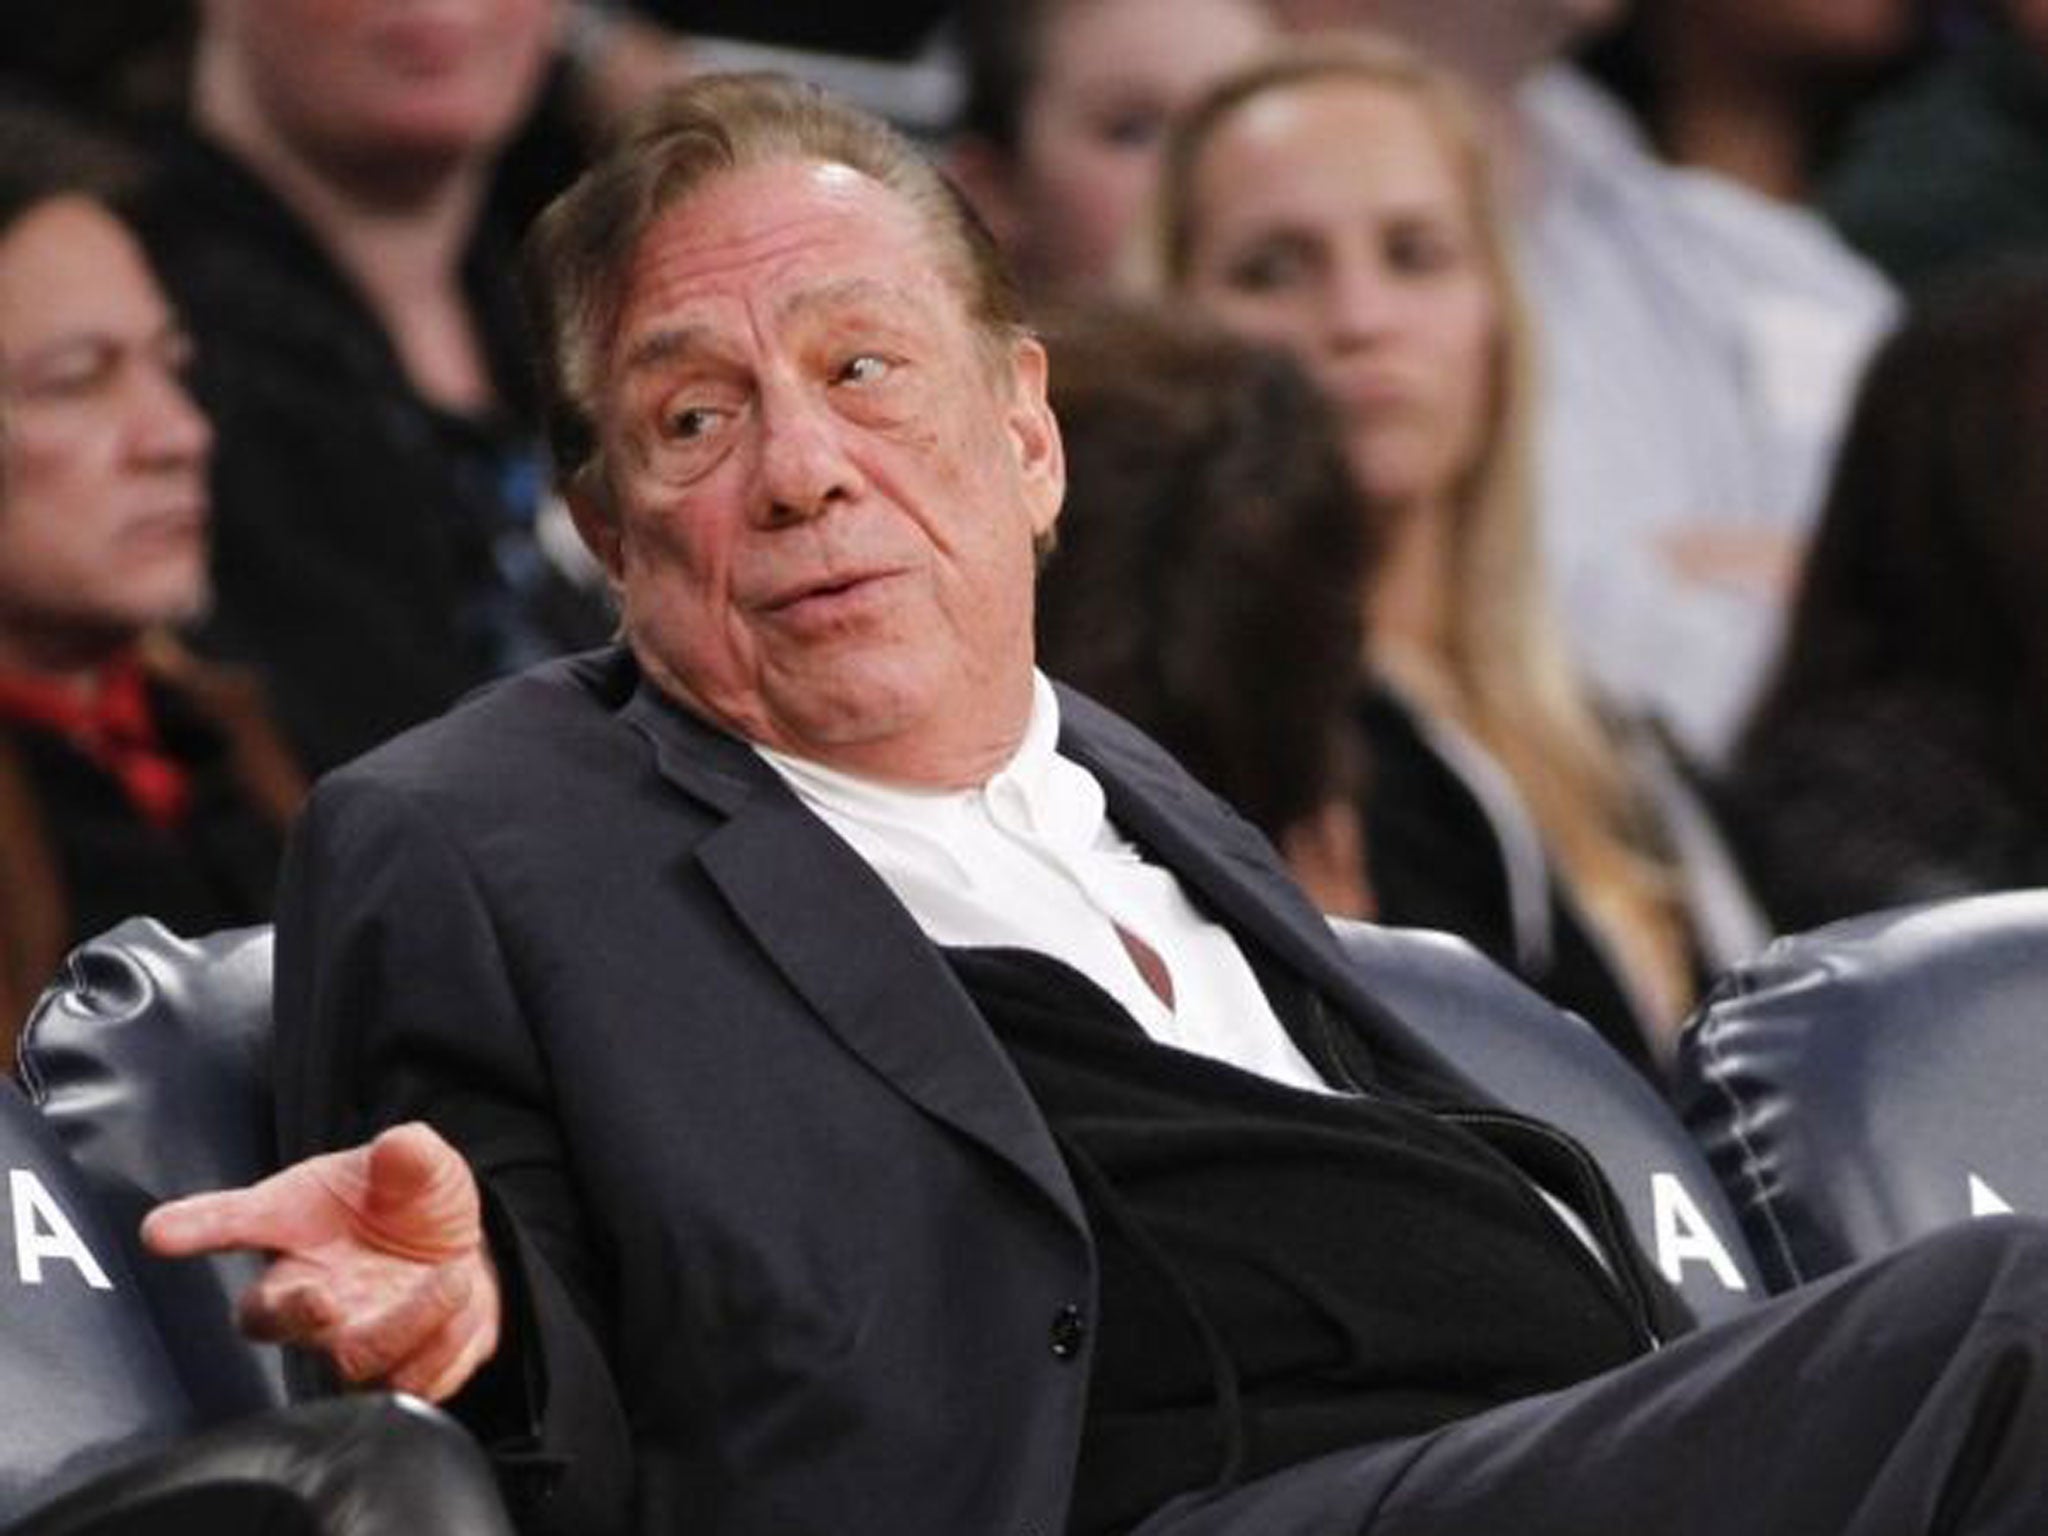 Los Angeles Clippers owner Donald Sterling gestures while watching the Clippers play the Los Angeles Lakers during an NBA preseason basketball game